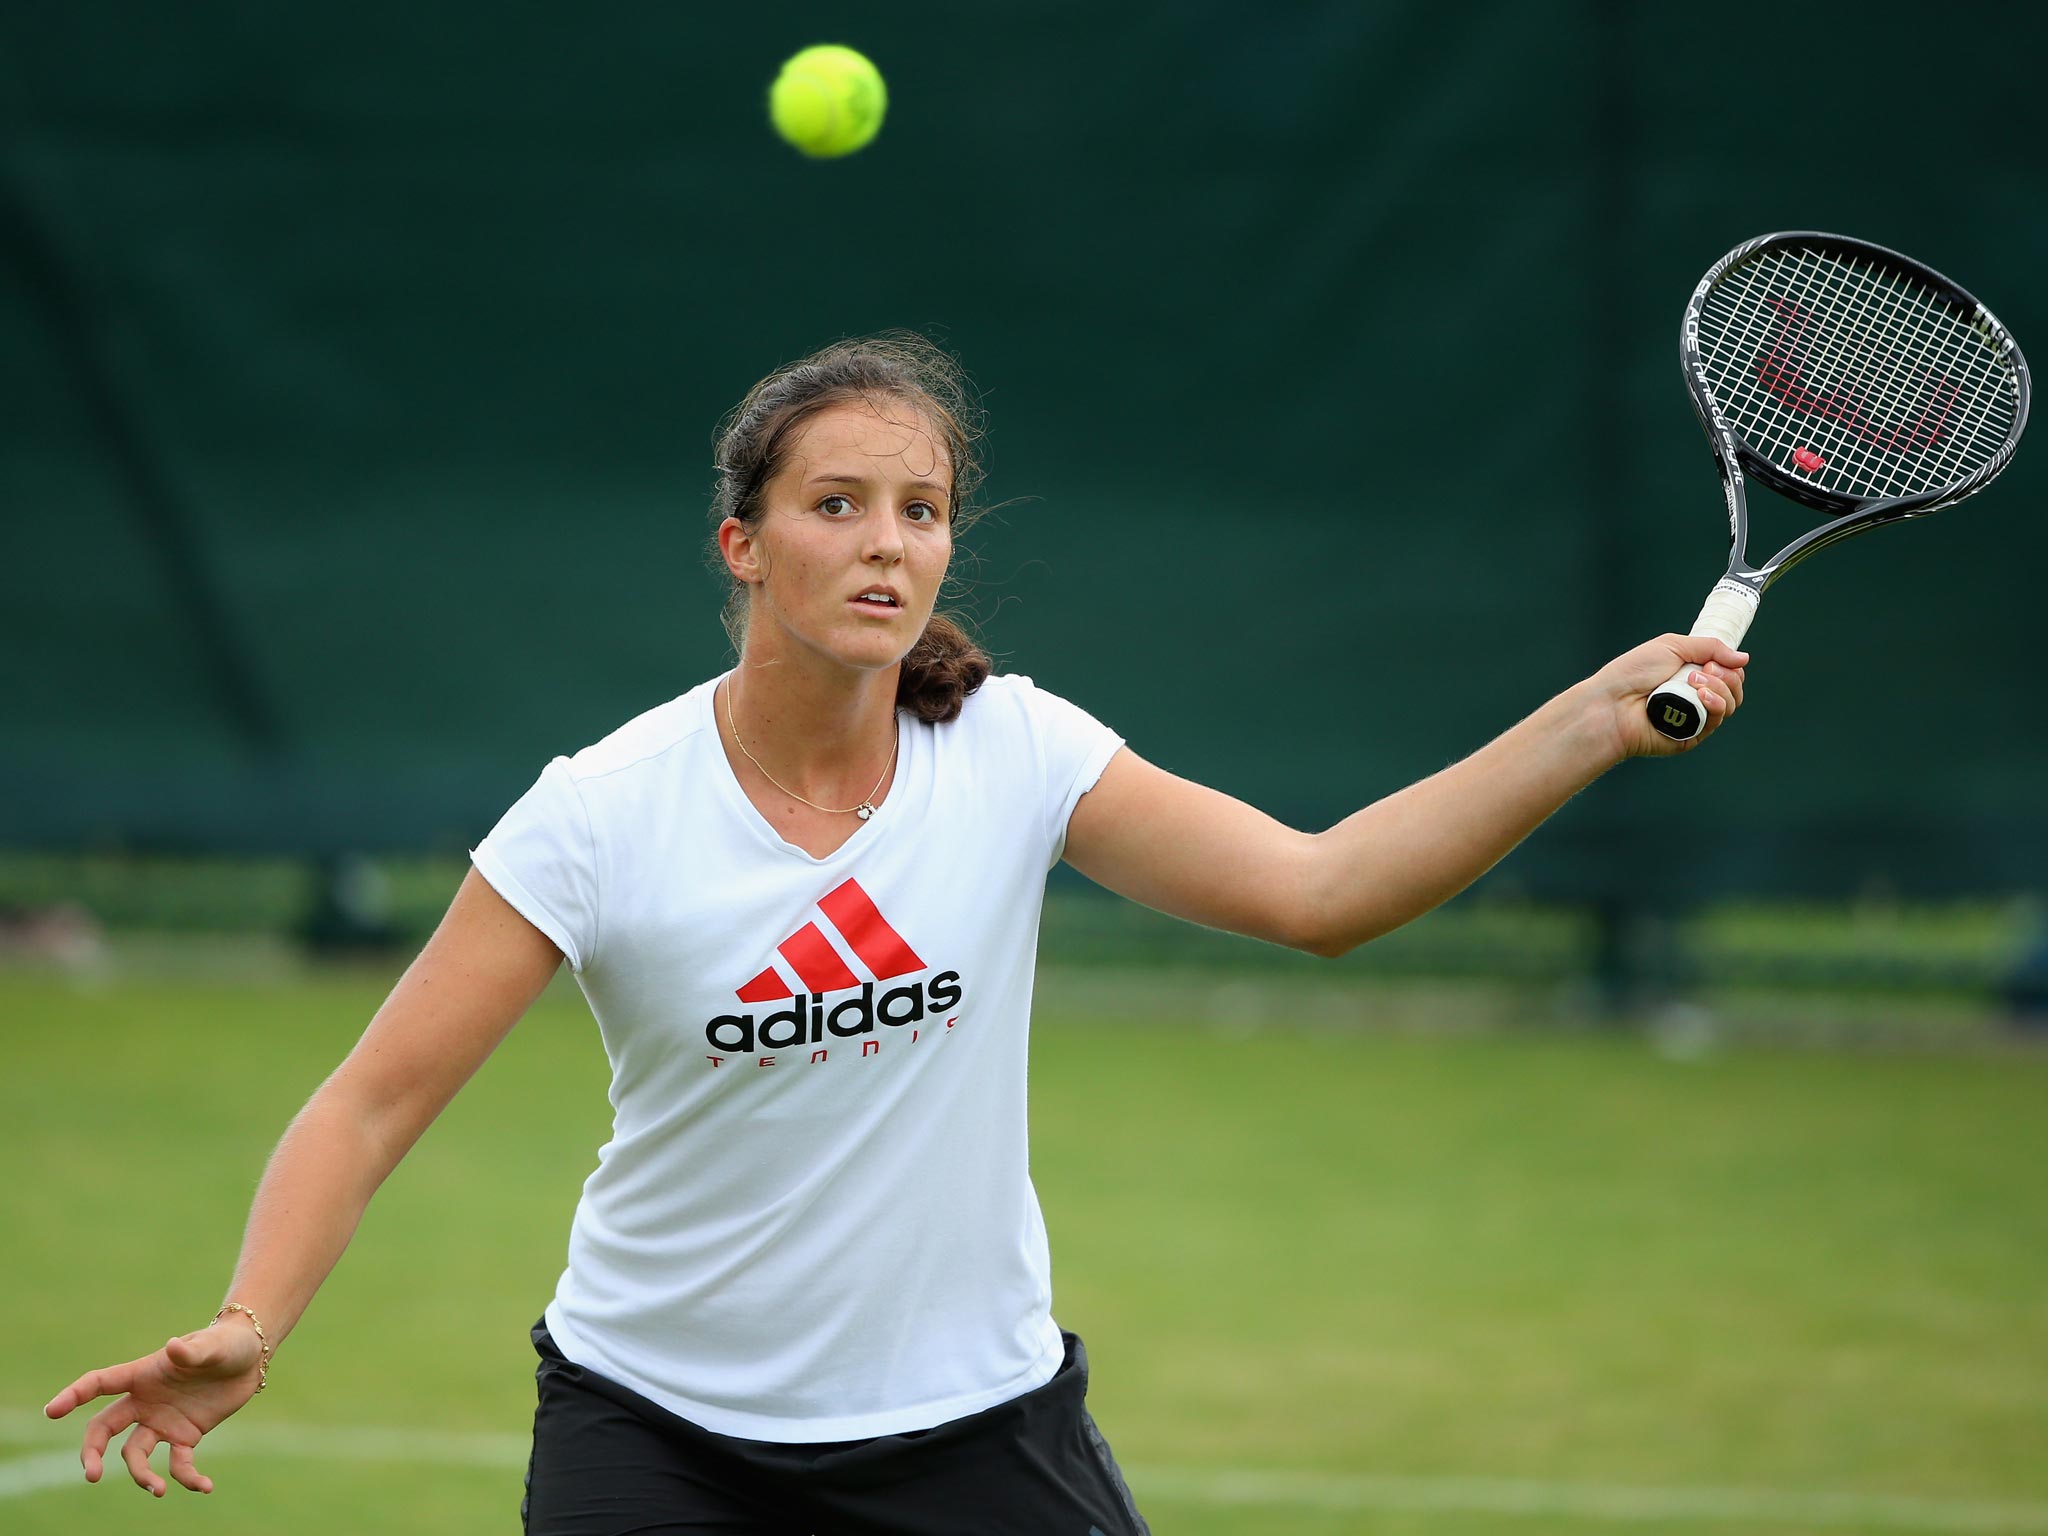 Laura Robson of Great Britain in a practice session during previews for Wimbledon Championships at Wimbledon